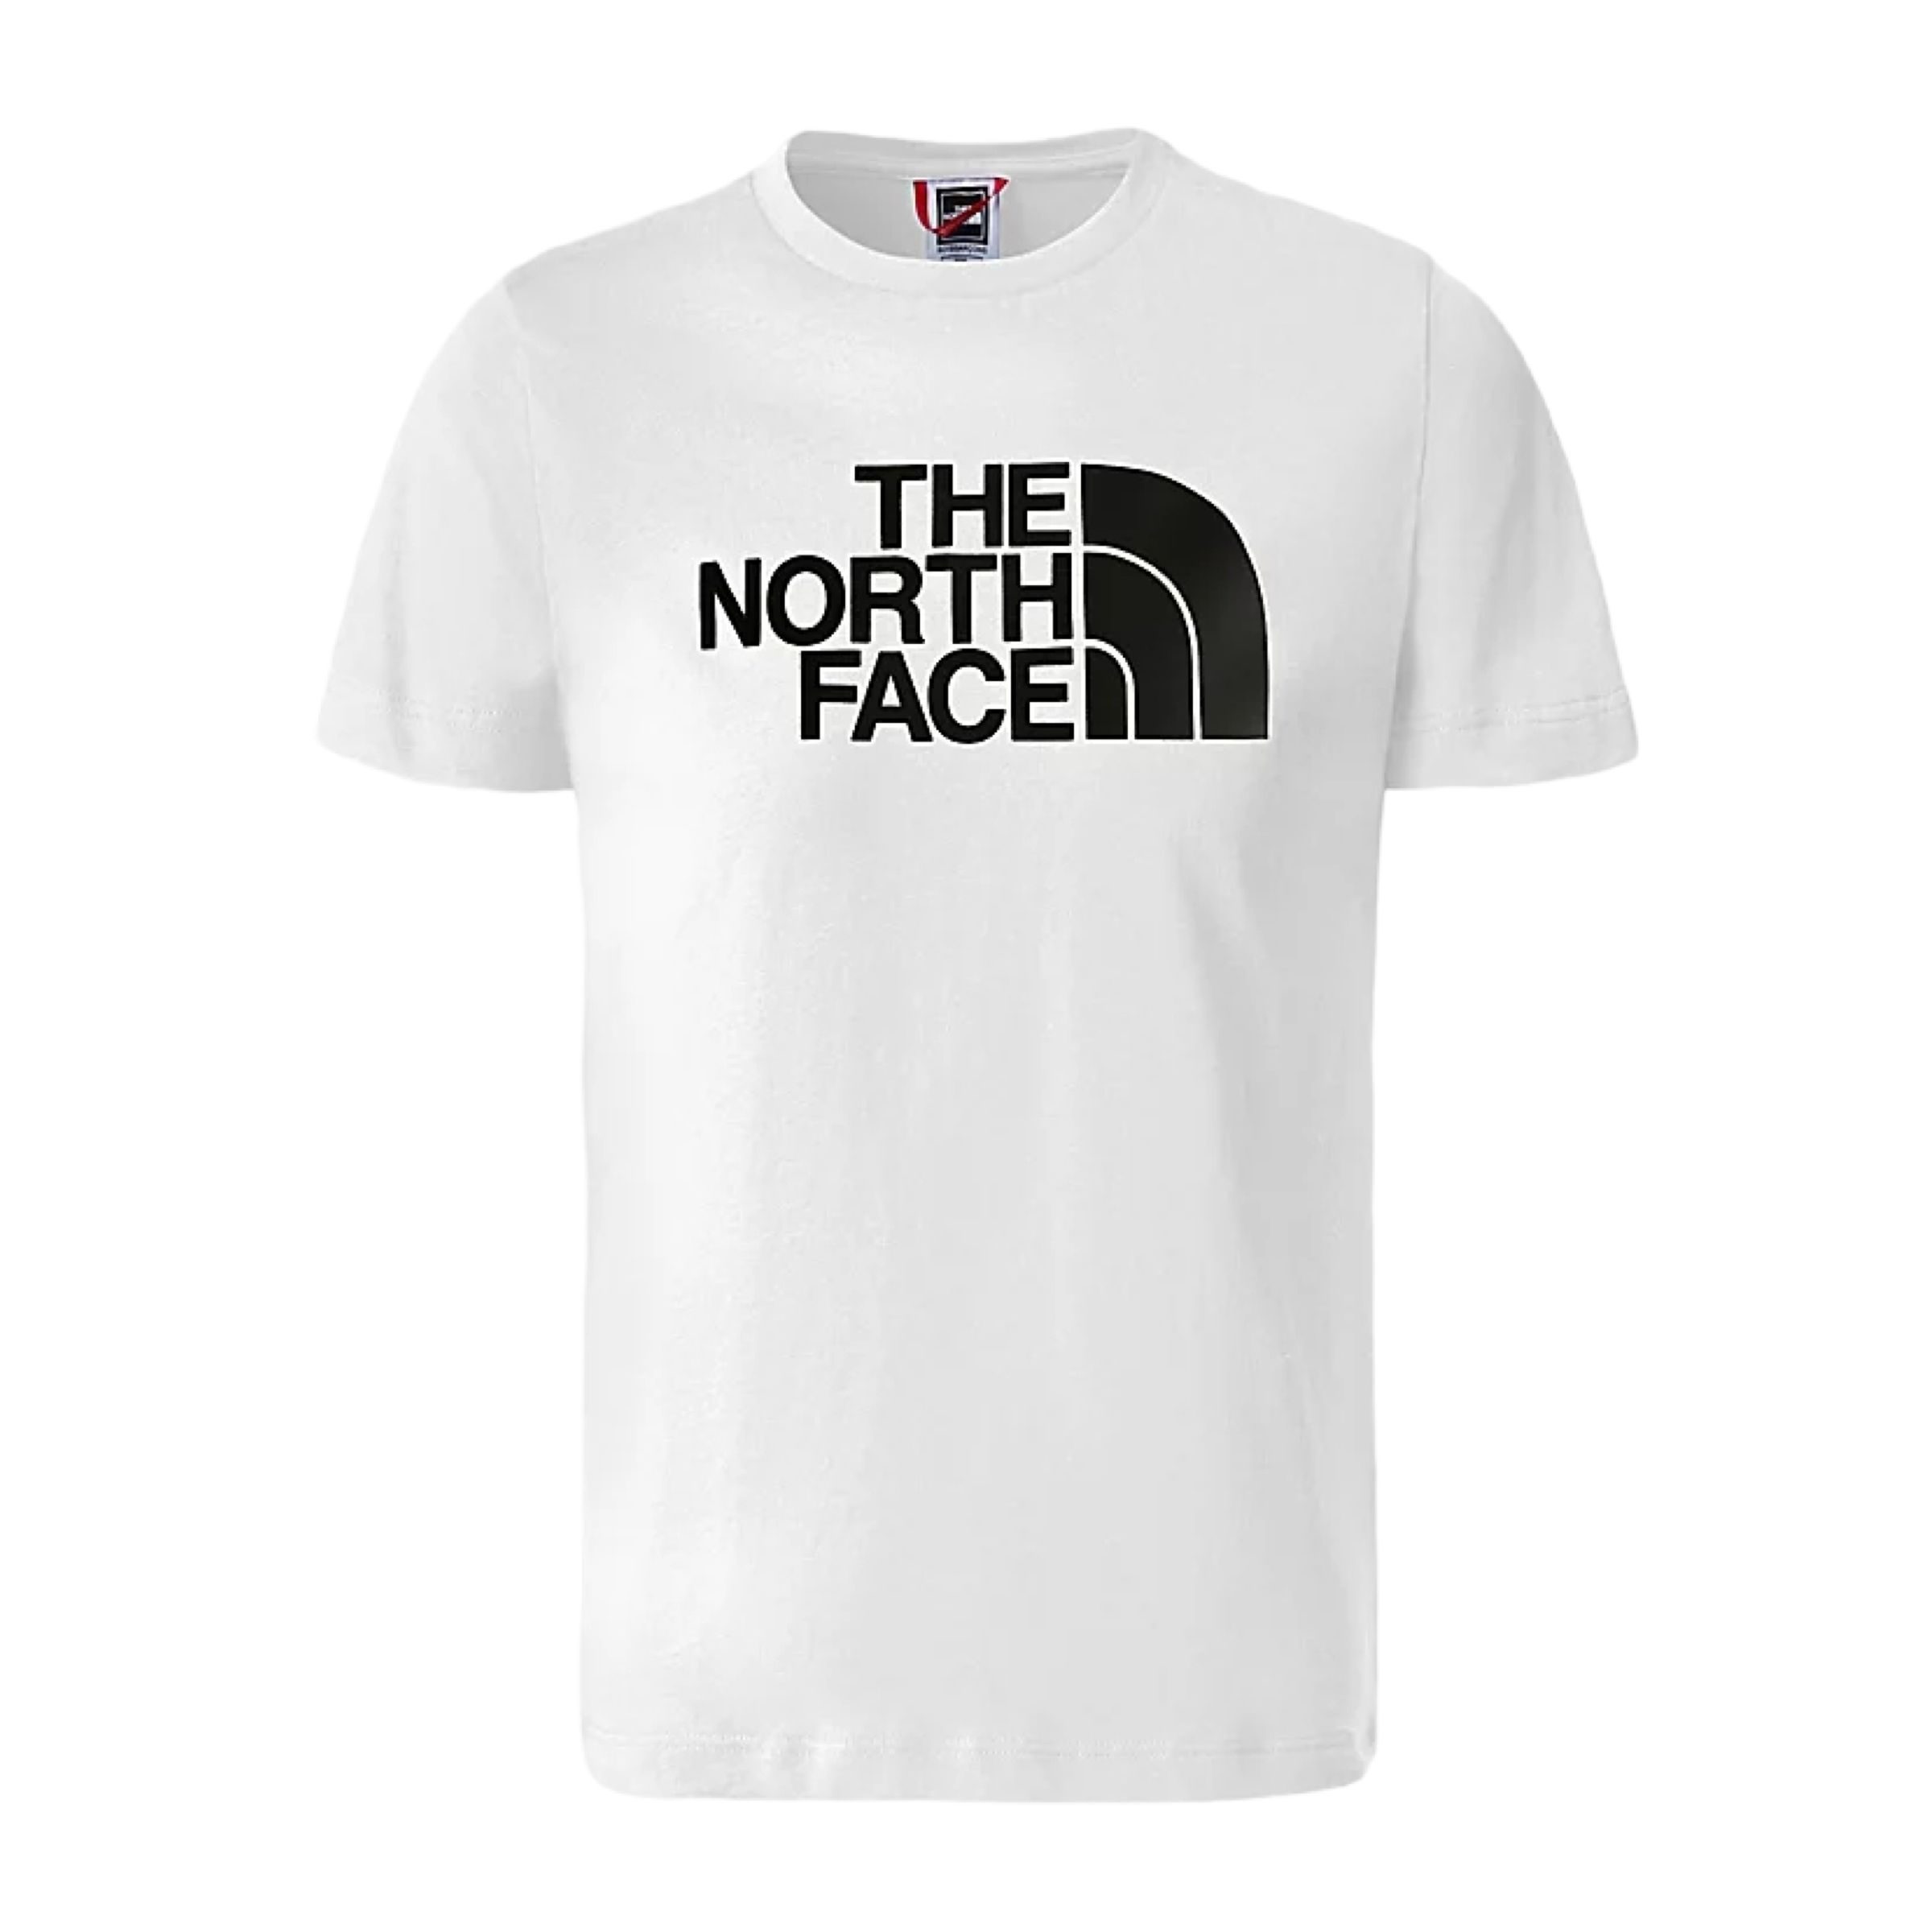 the-north-face-white-and-black-easy-bambino-t-shirt